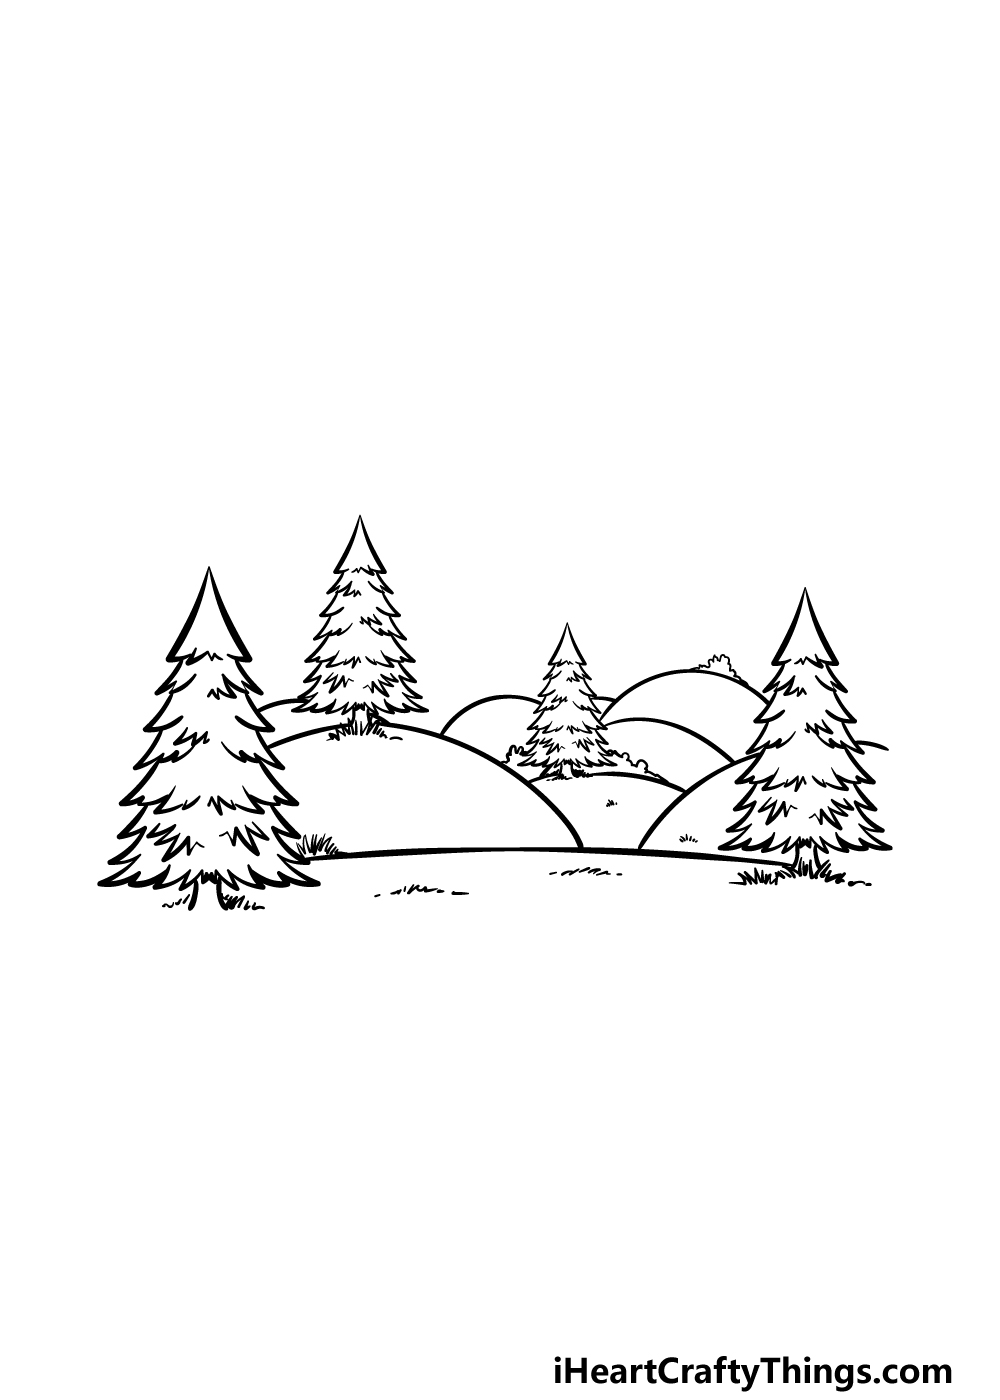 drawing sketch of mountain with hills｜TikTok Search